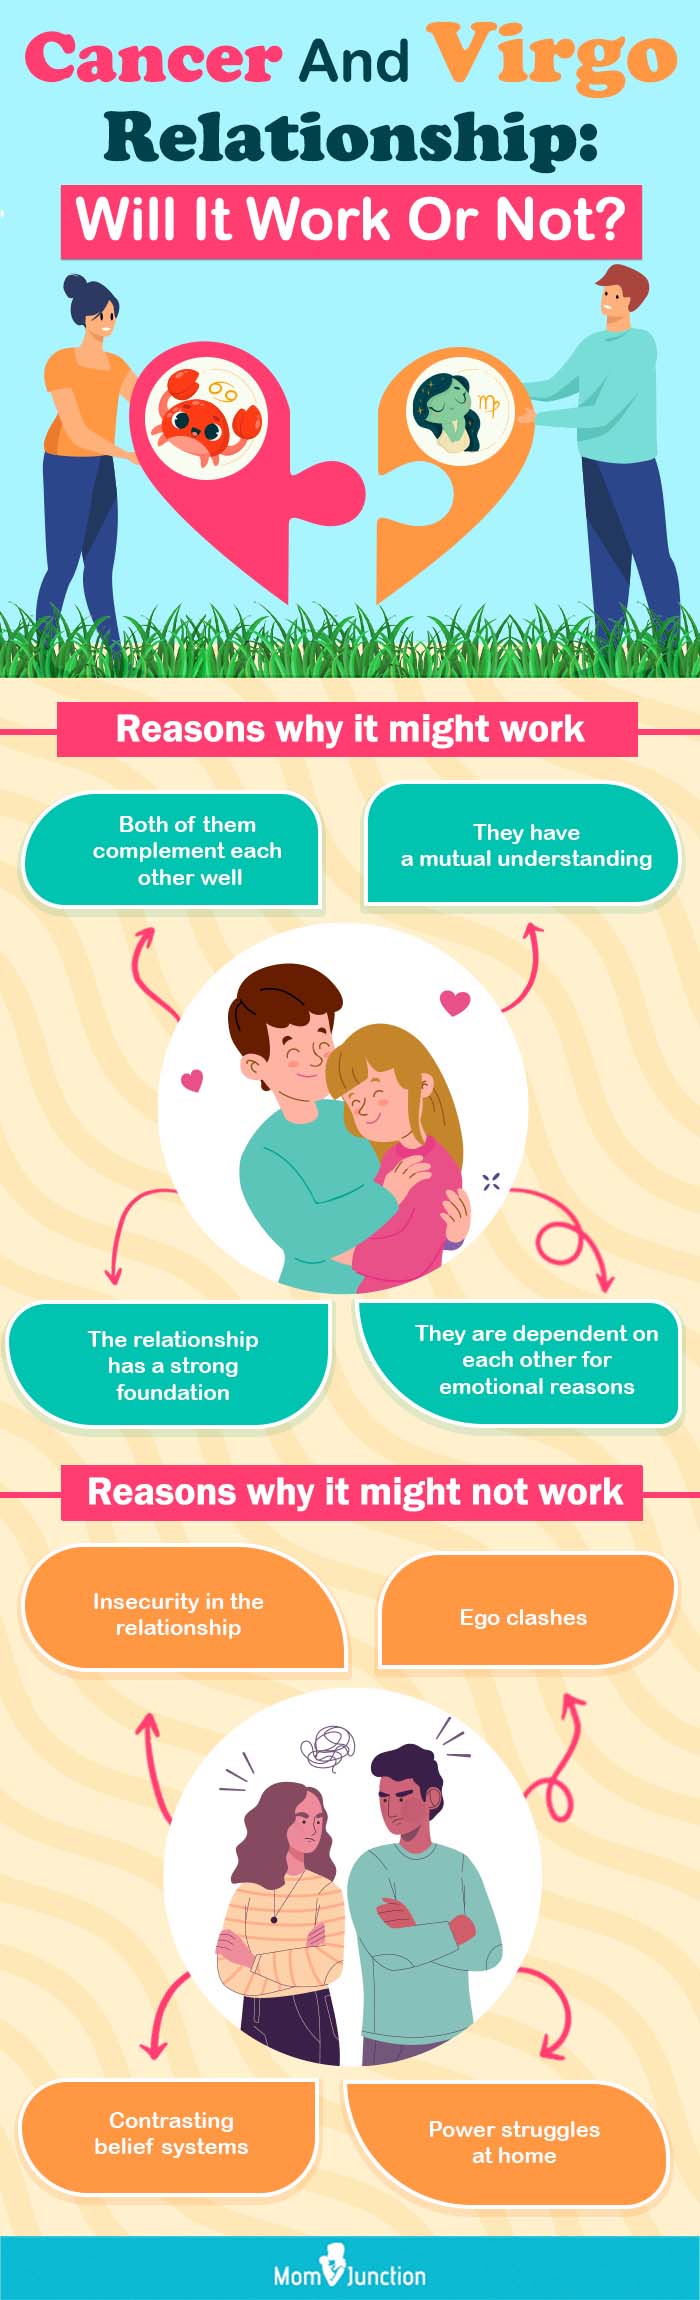 cancer and virgo relationship [infographic]